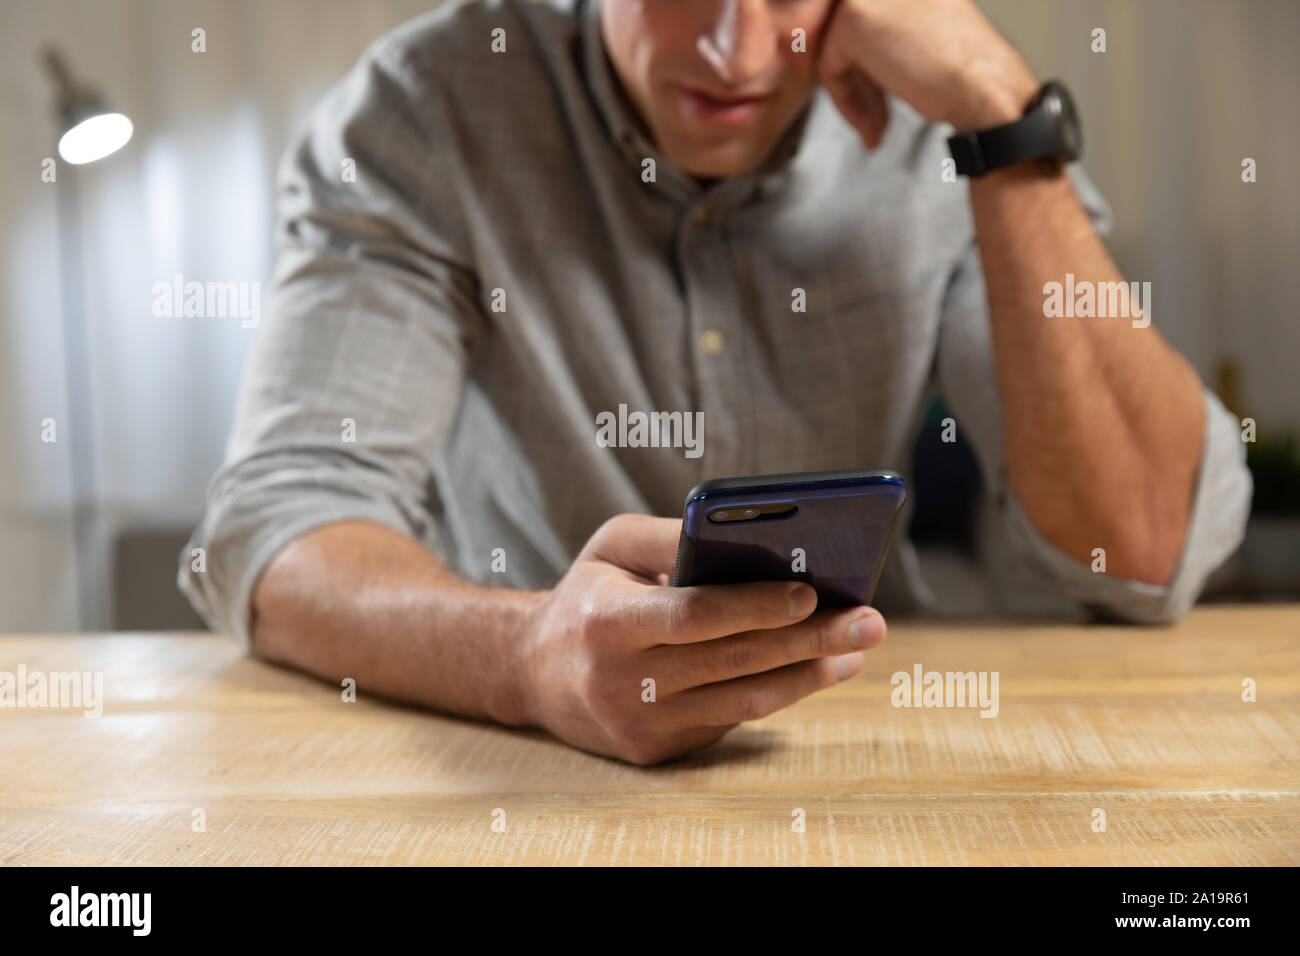 Young man at home using a smartphone Stock Photo